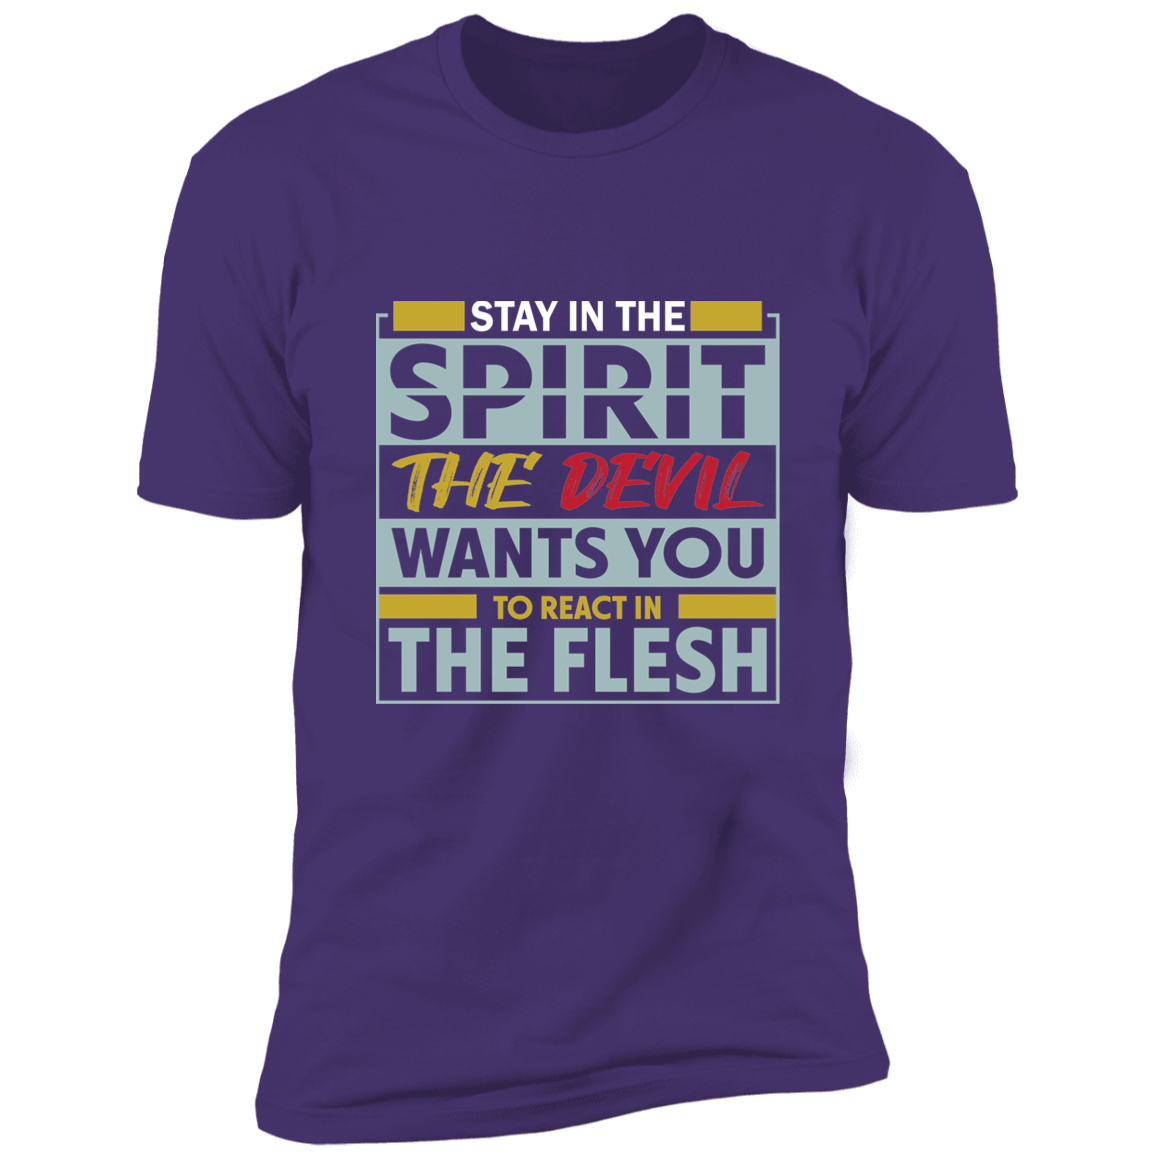 STAY IN THE SPIRIT  Short Sleeve WHT Tee